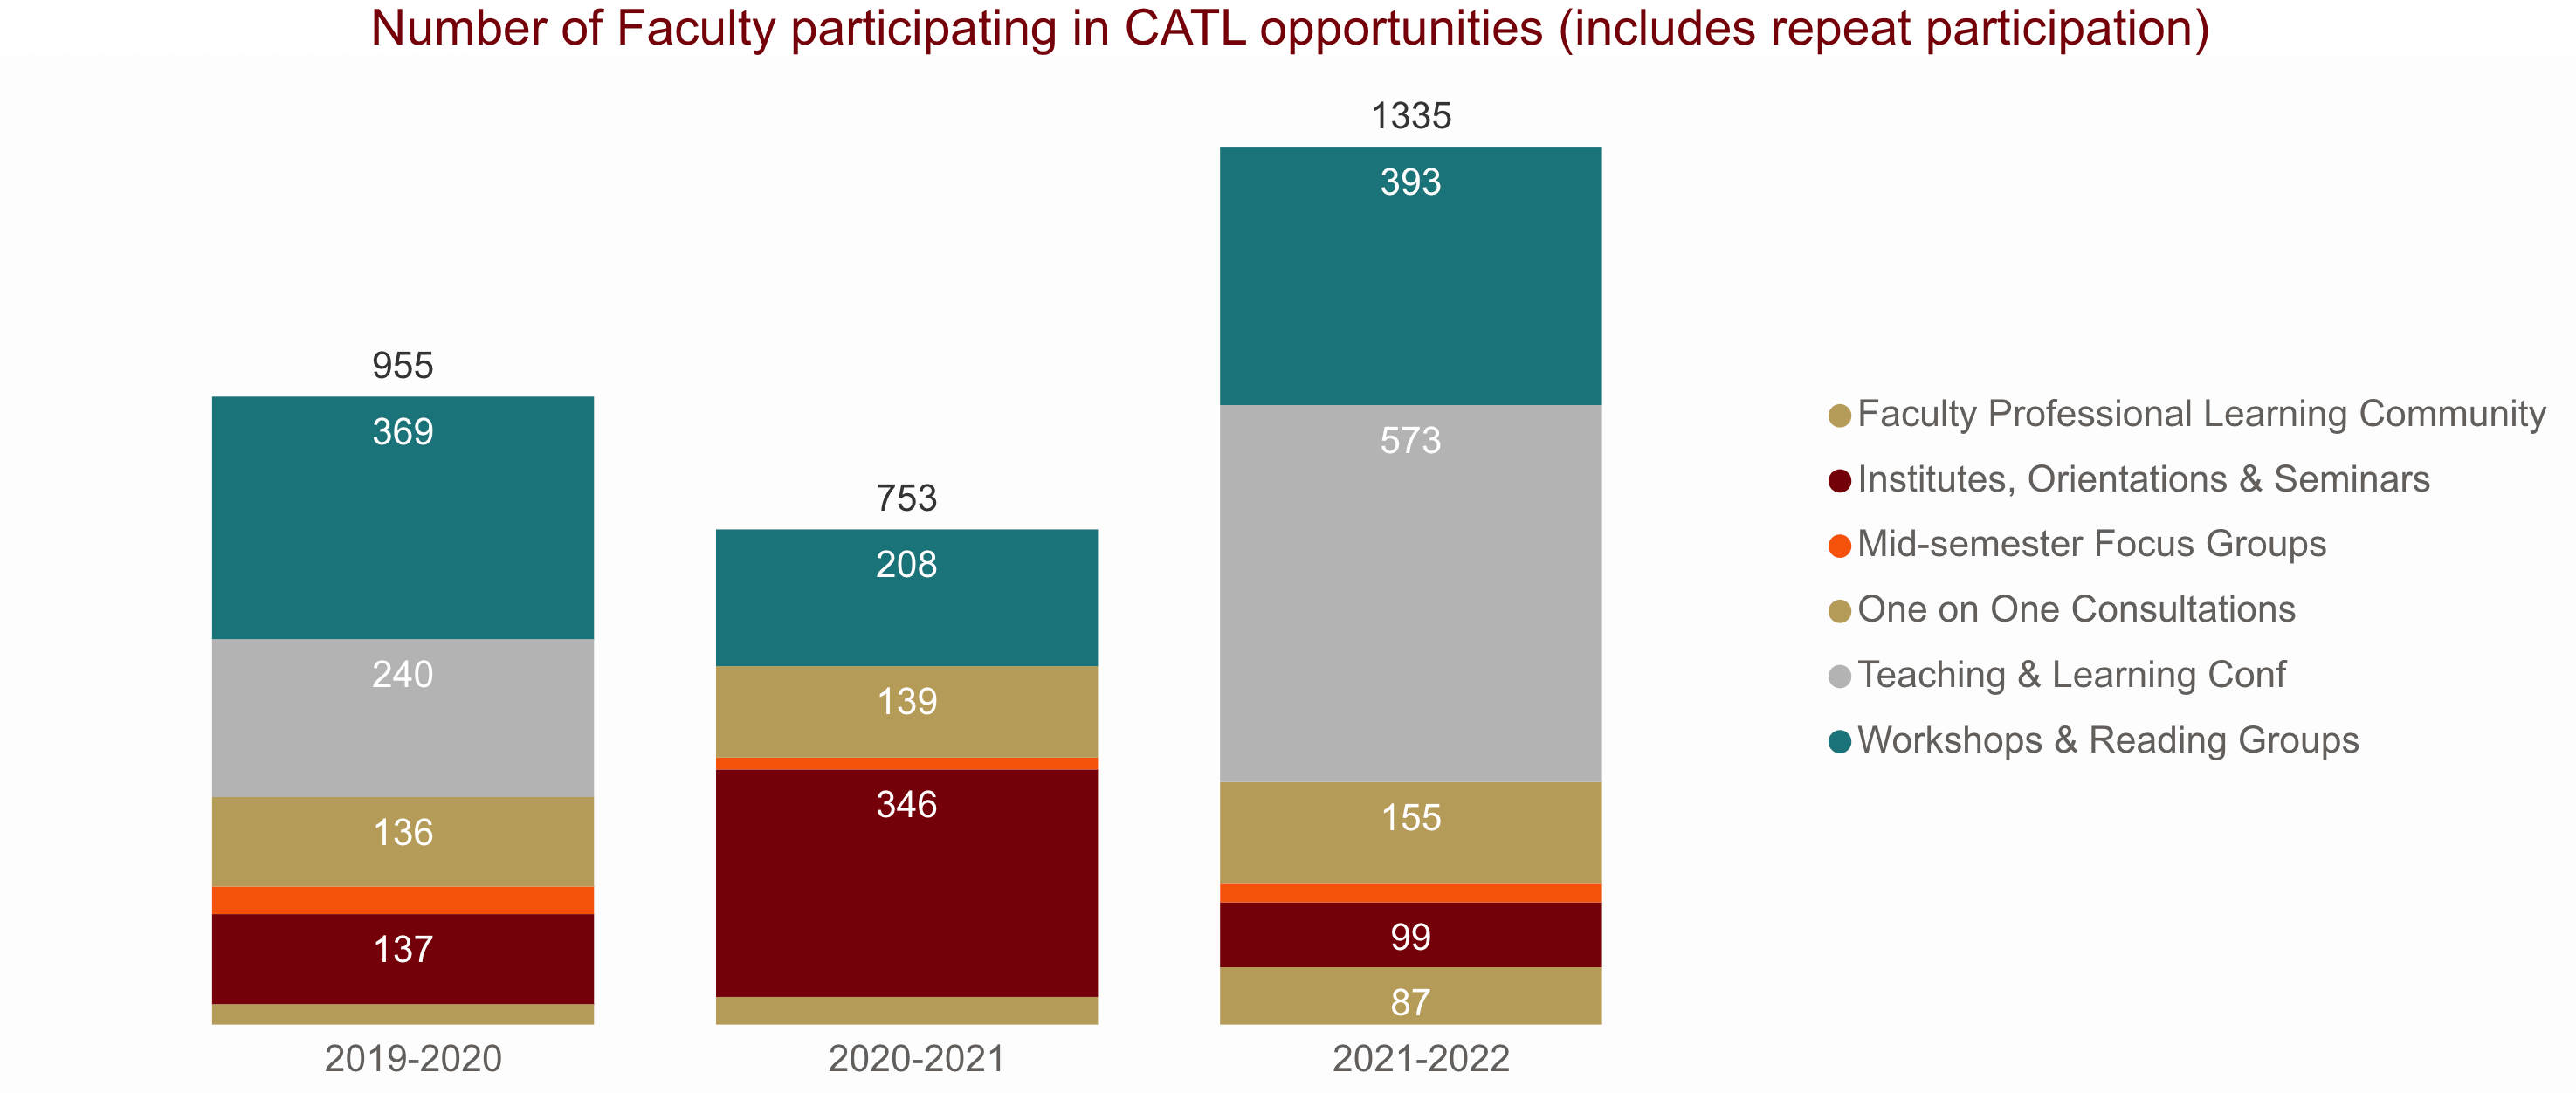 Bar chart showing the number of faculty participating in C.A.T.L. opportunities including repeat participation